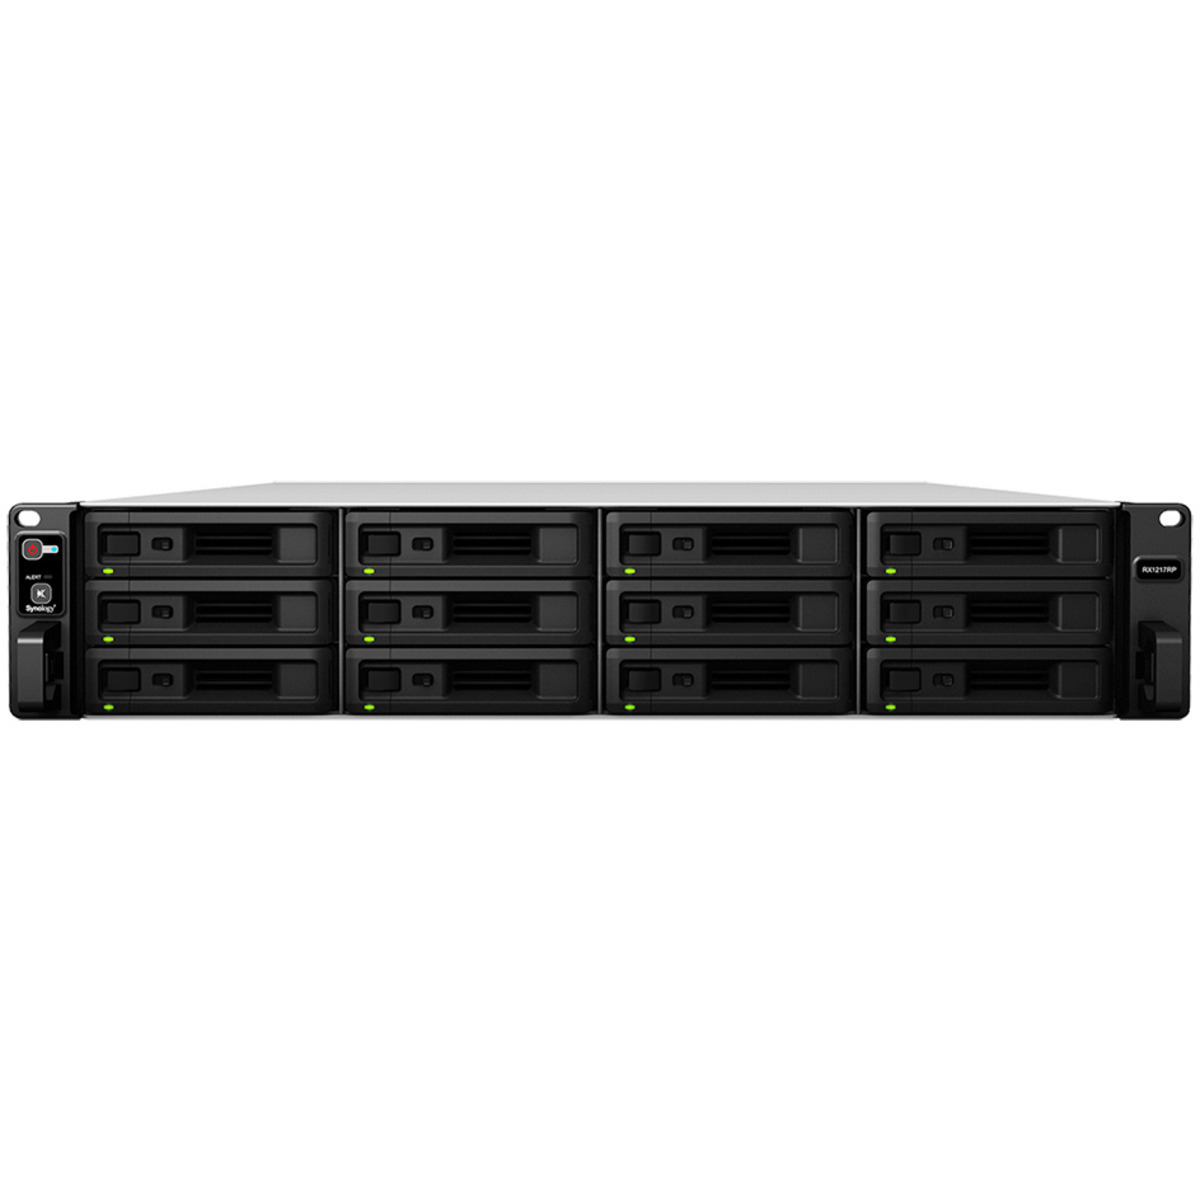 buy $2756 Synology RX1217 12tb RackMount Expansion Enclosure 12x1000gb Samsung 870 QVO MZ-77Q1T0 2.5 SATA 6Gb/s SSD CONSUMER Class Drives Installed - Burn-In Tested - nas headquarters buy network attached storage server device das new raid-5 free shipping usa RX1217